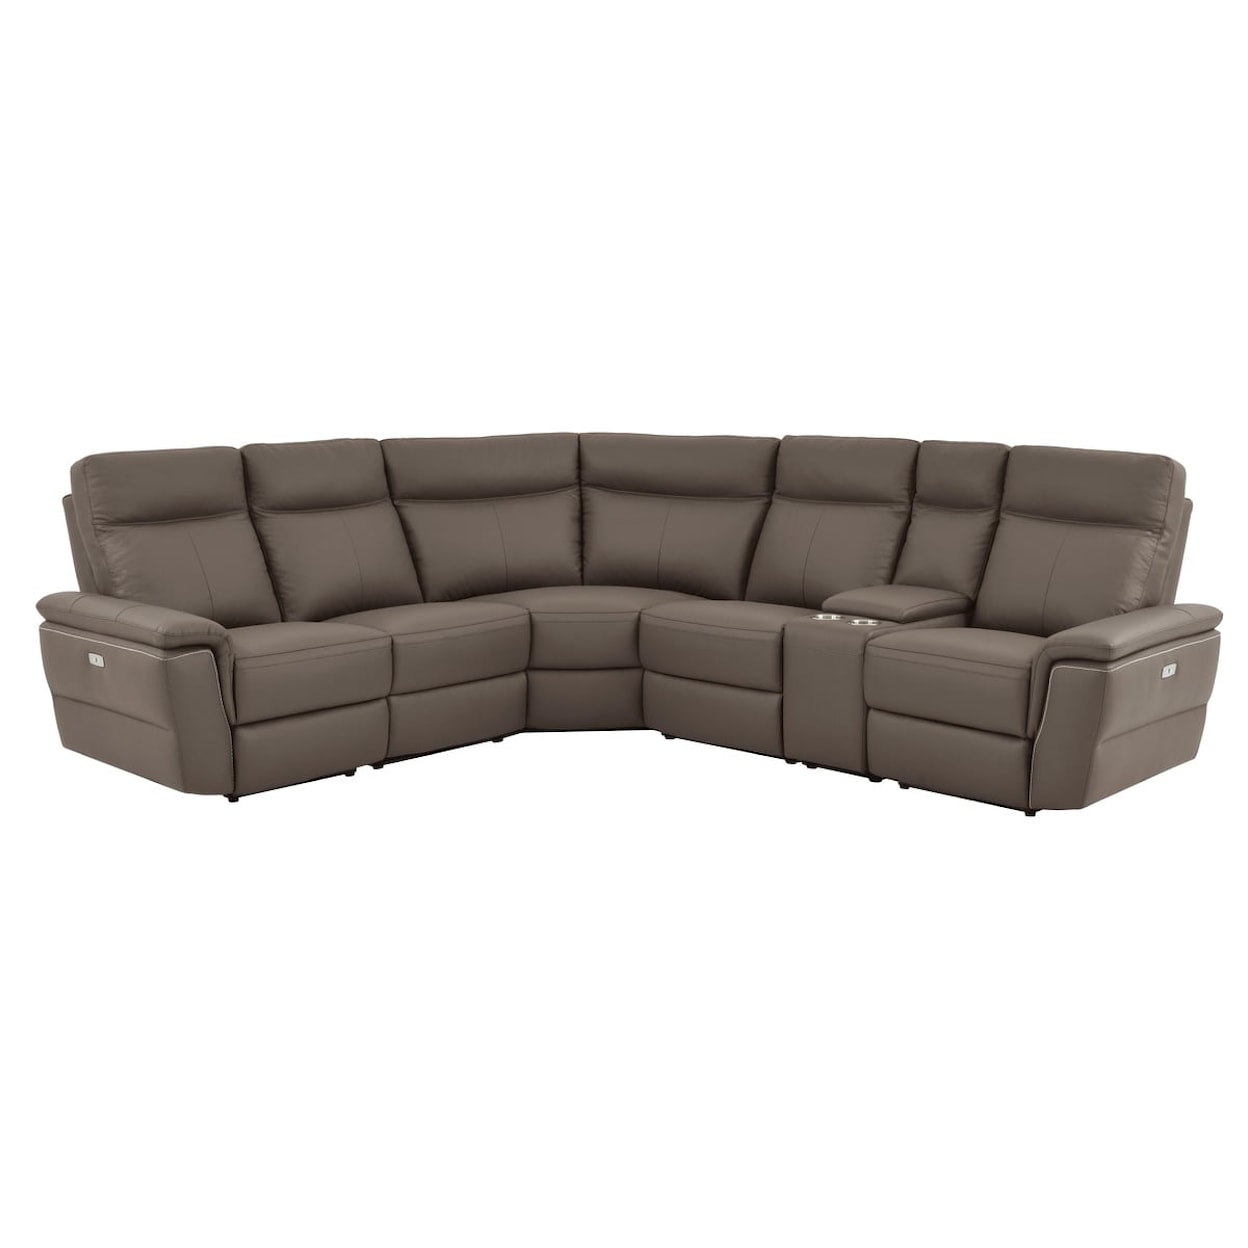 Homelegance Olympia 6-Piece Power Reclining Sectional